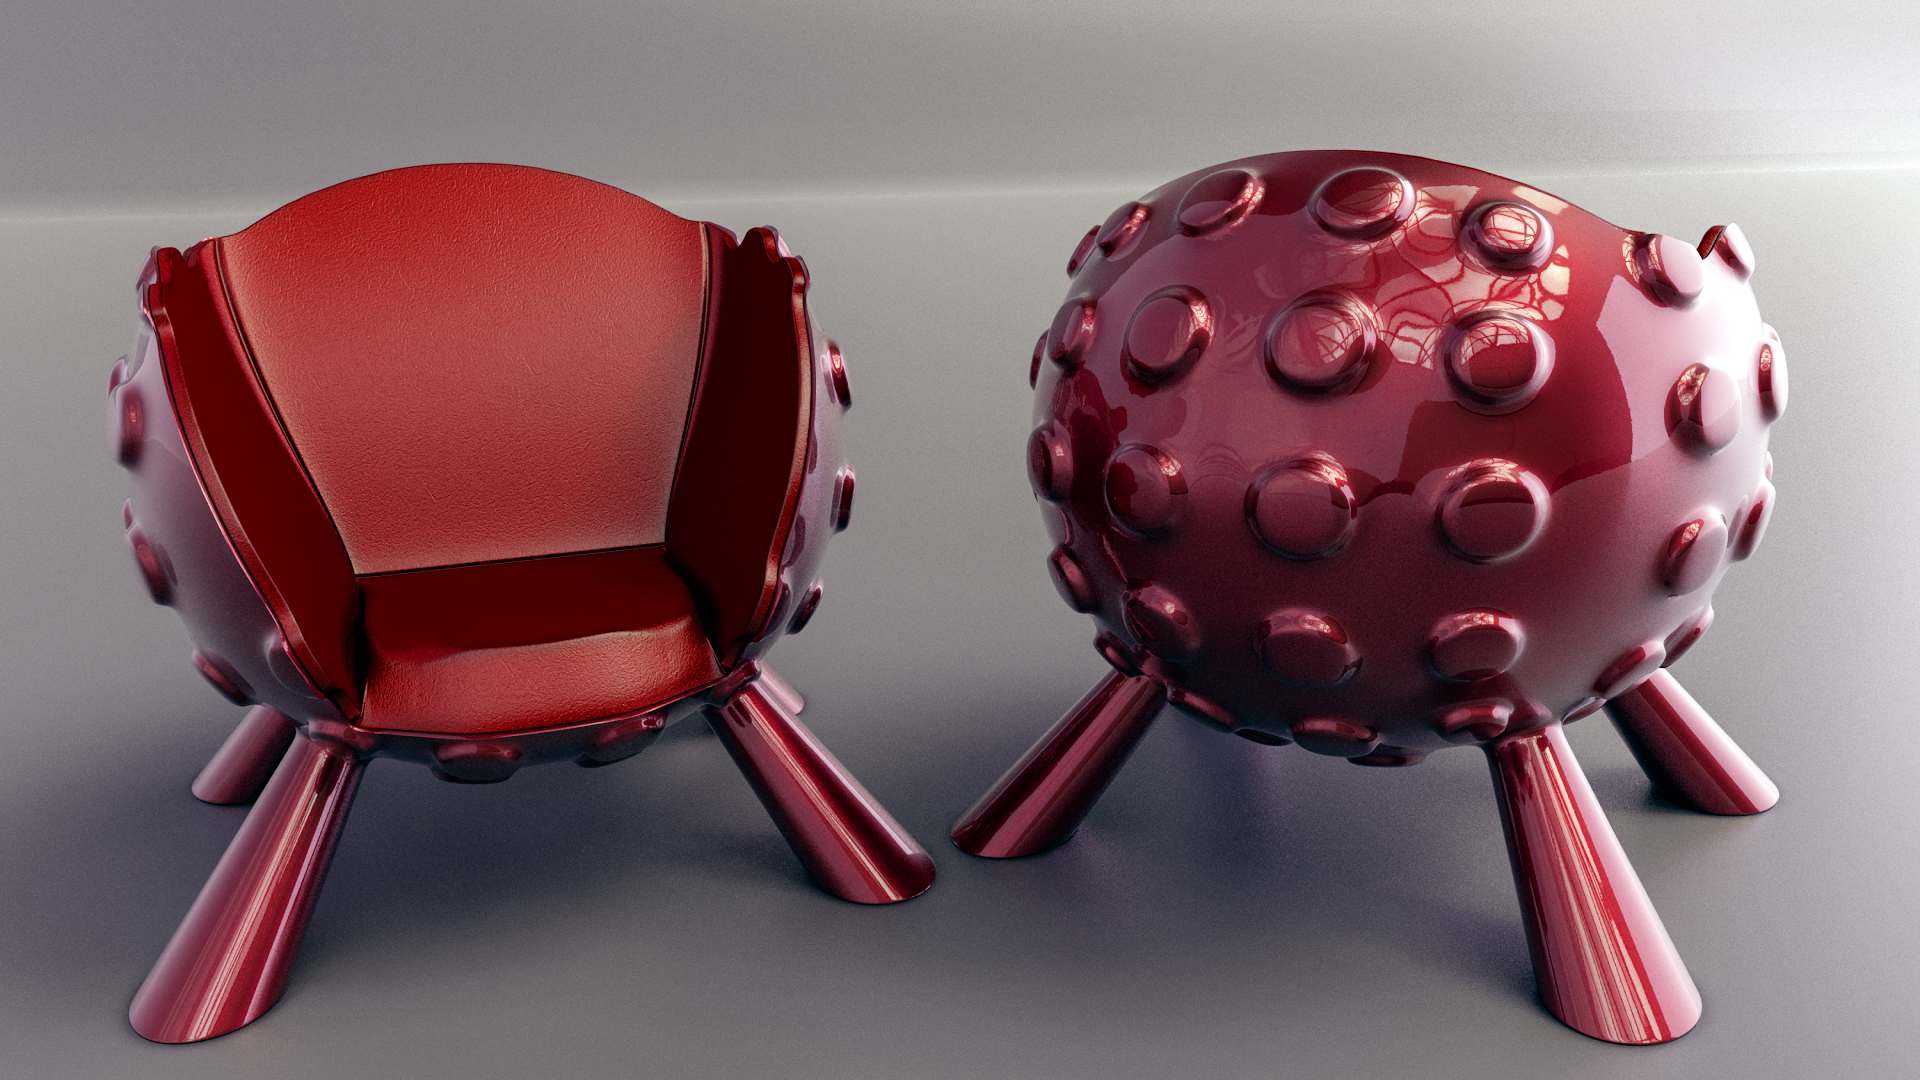 industrialdesign17 Industrial Design Modeled and Rendered in Modo by Mike Grauer